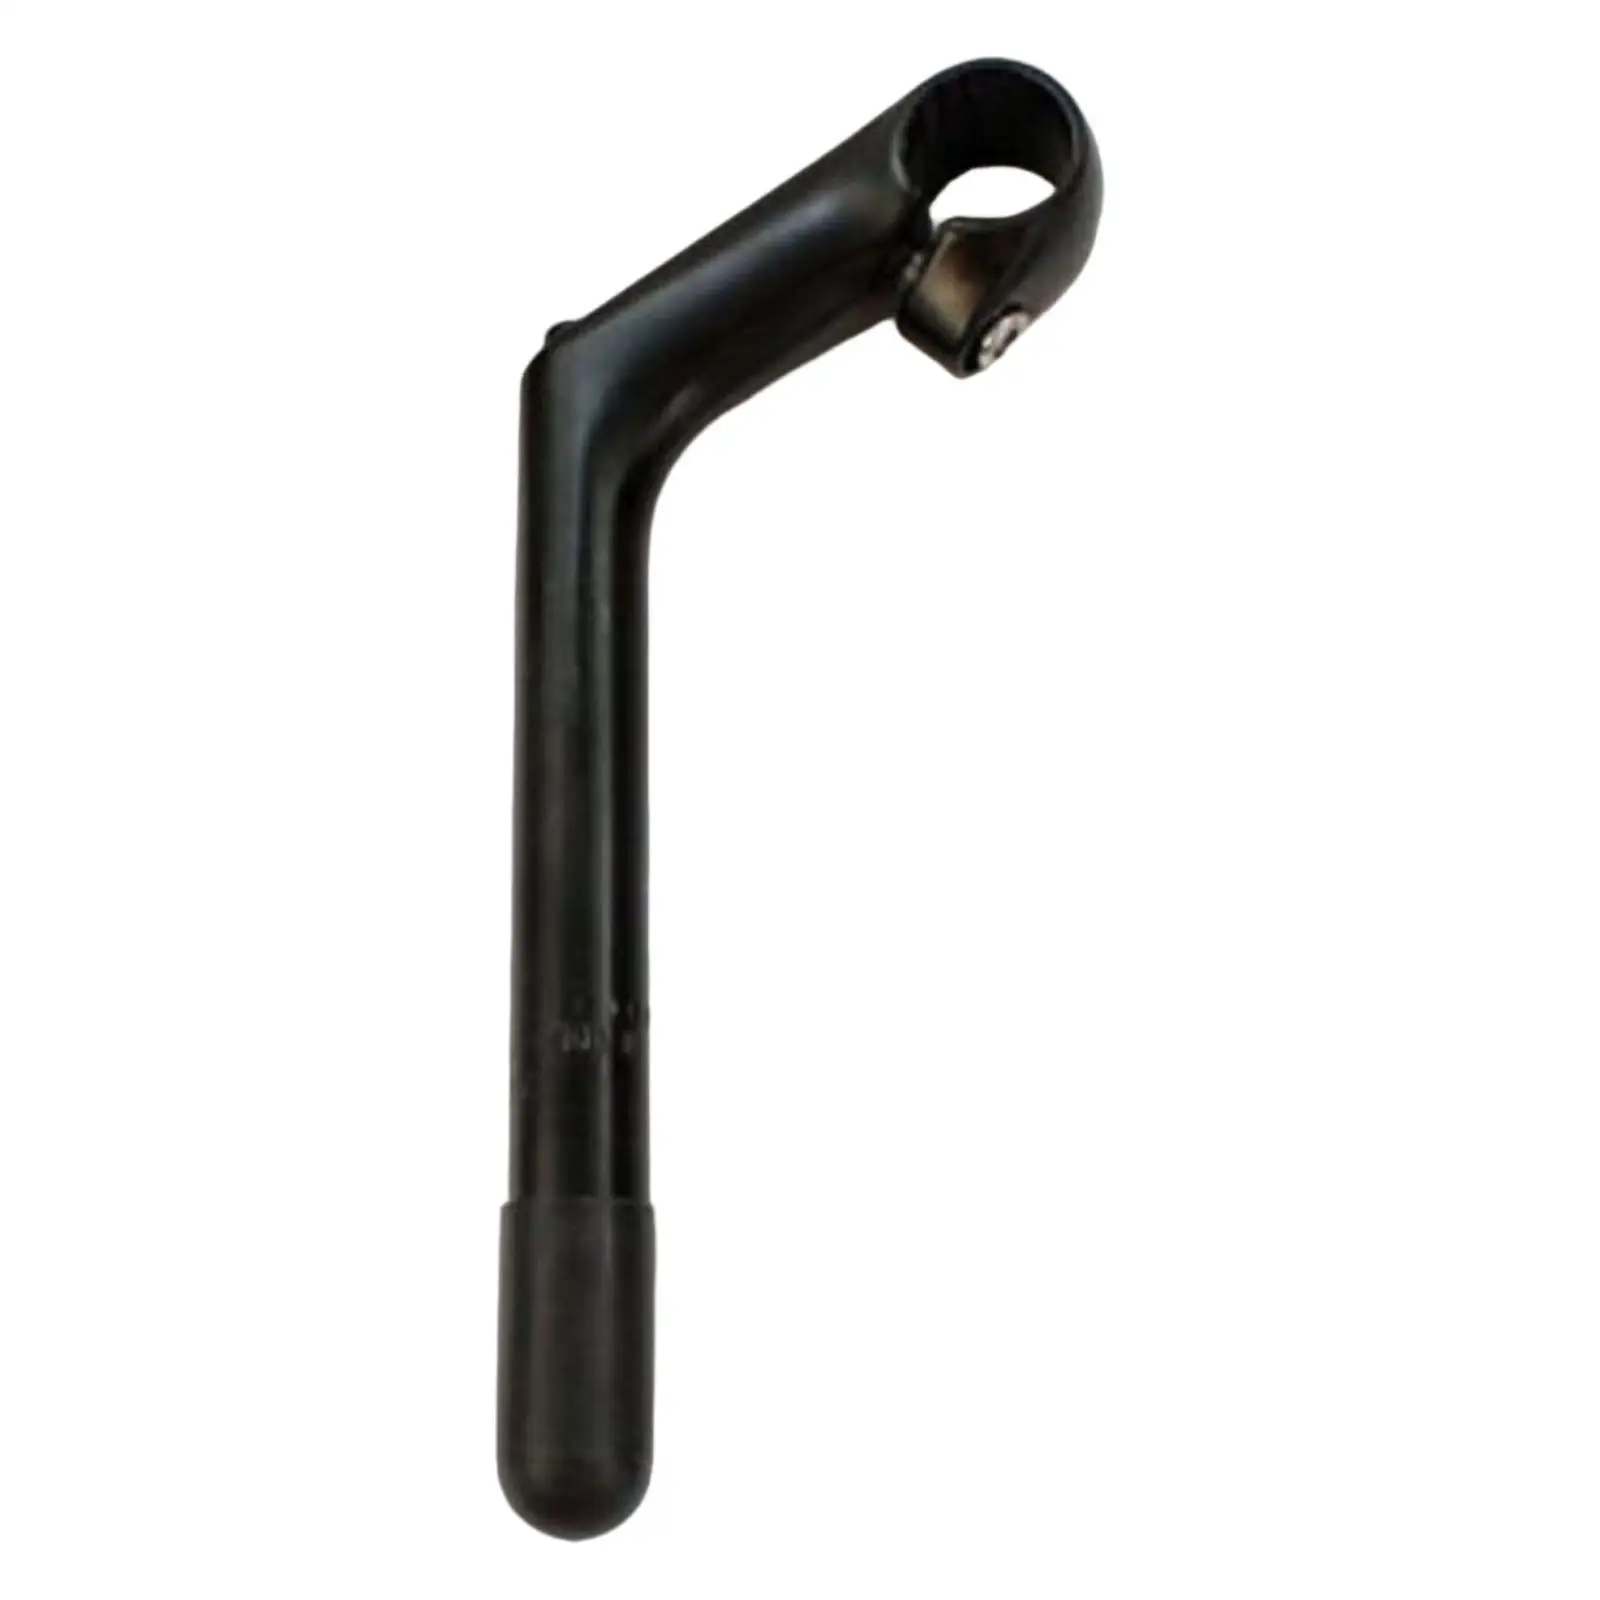 Handle Bar Stem Lightweight Heavy Duty Bicycle Quill Stem for Comfort Bikes